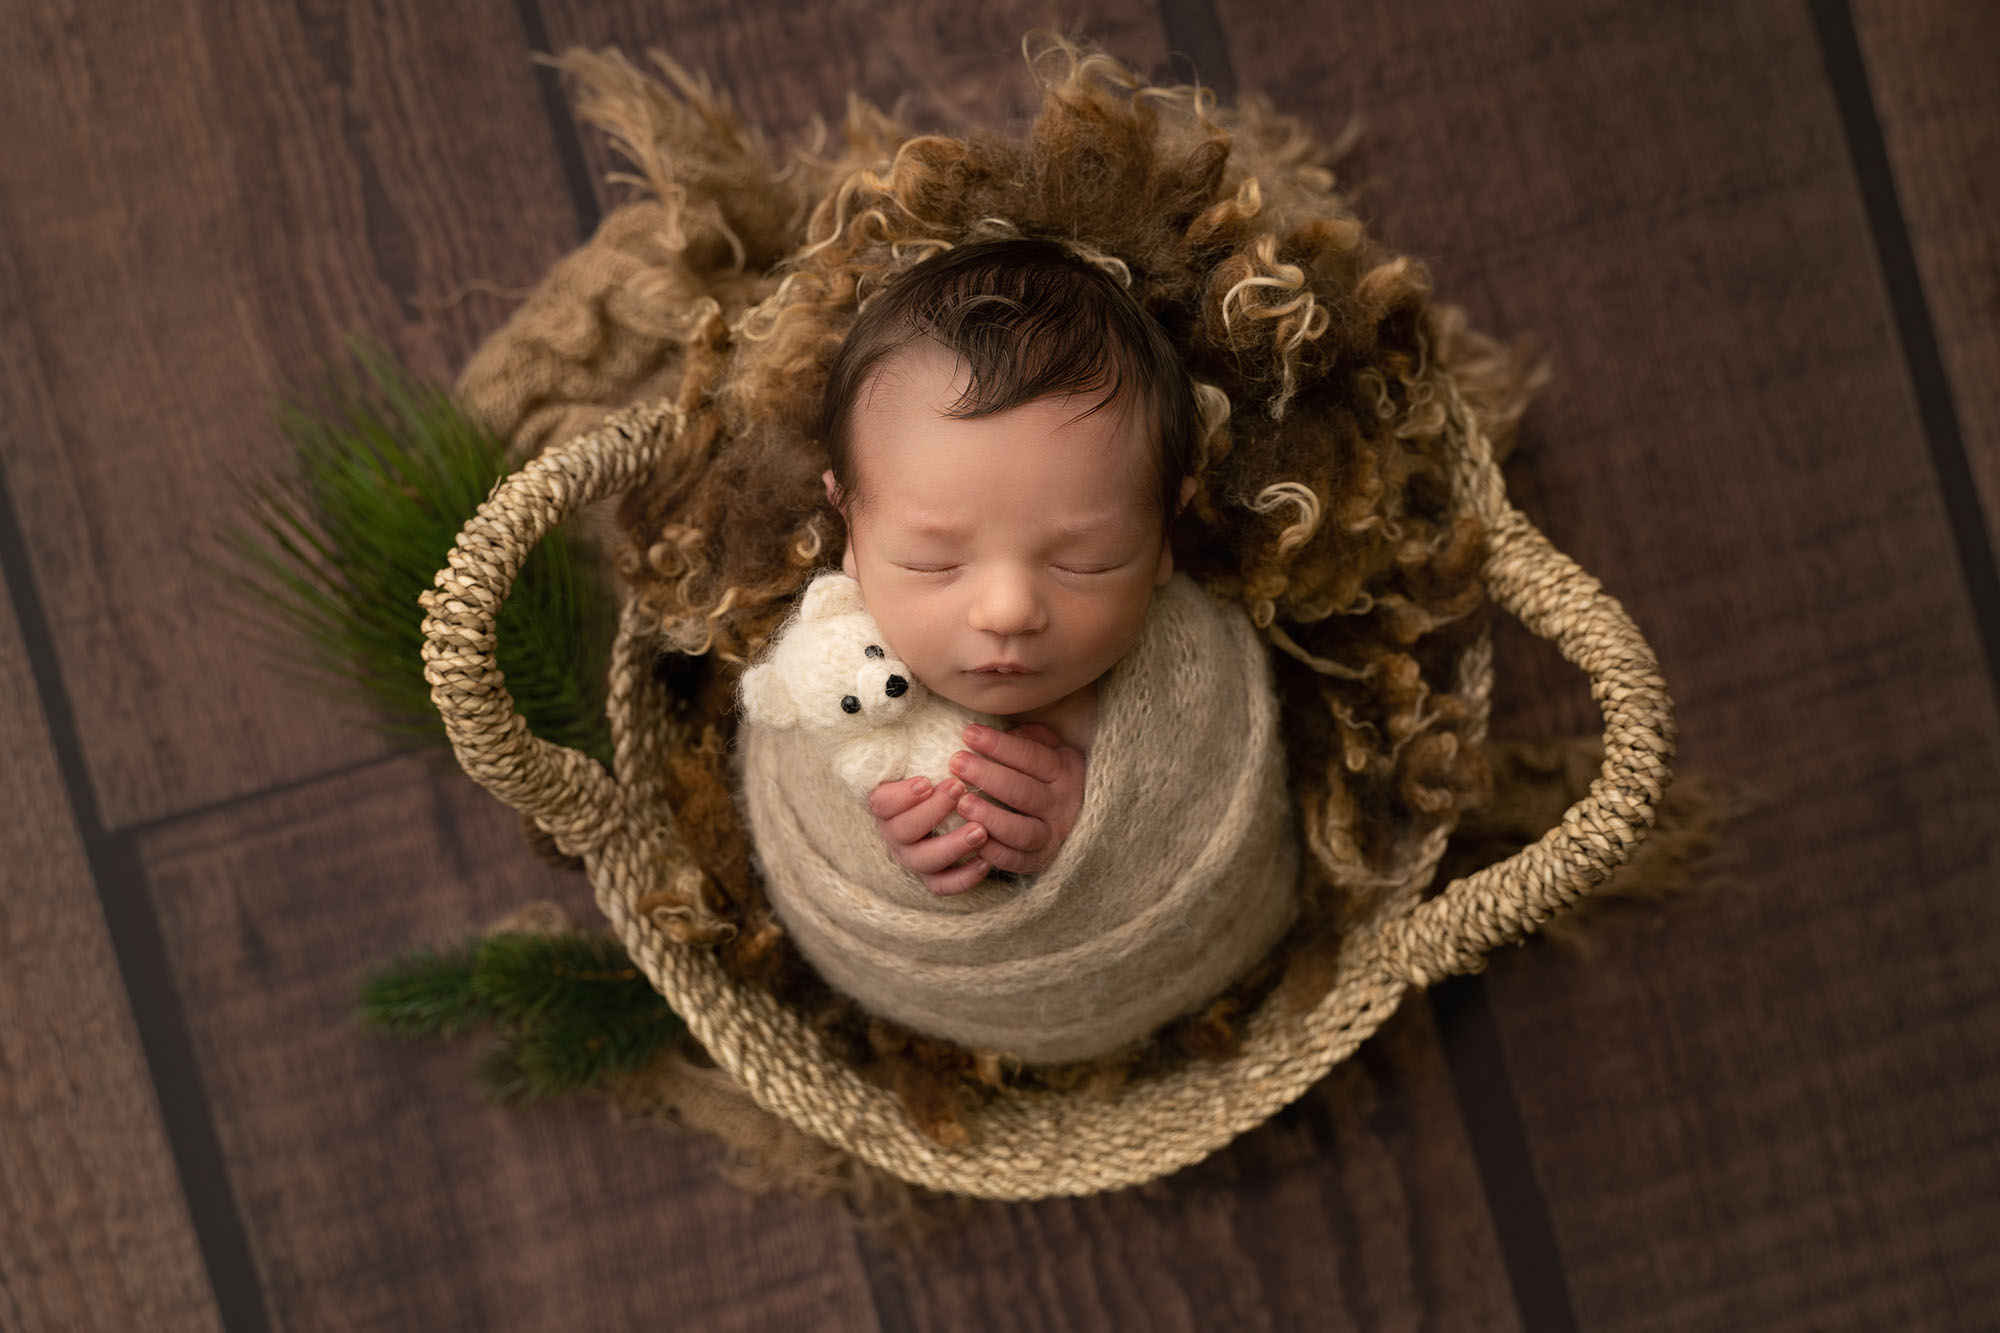 newborn photographer edinburgh photo of baby wrapped and posed in a basket